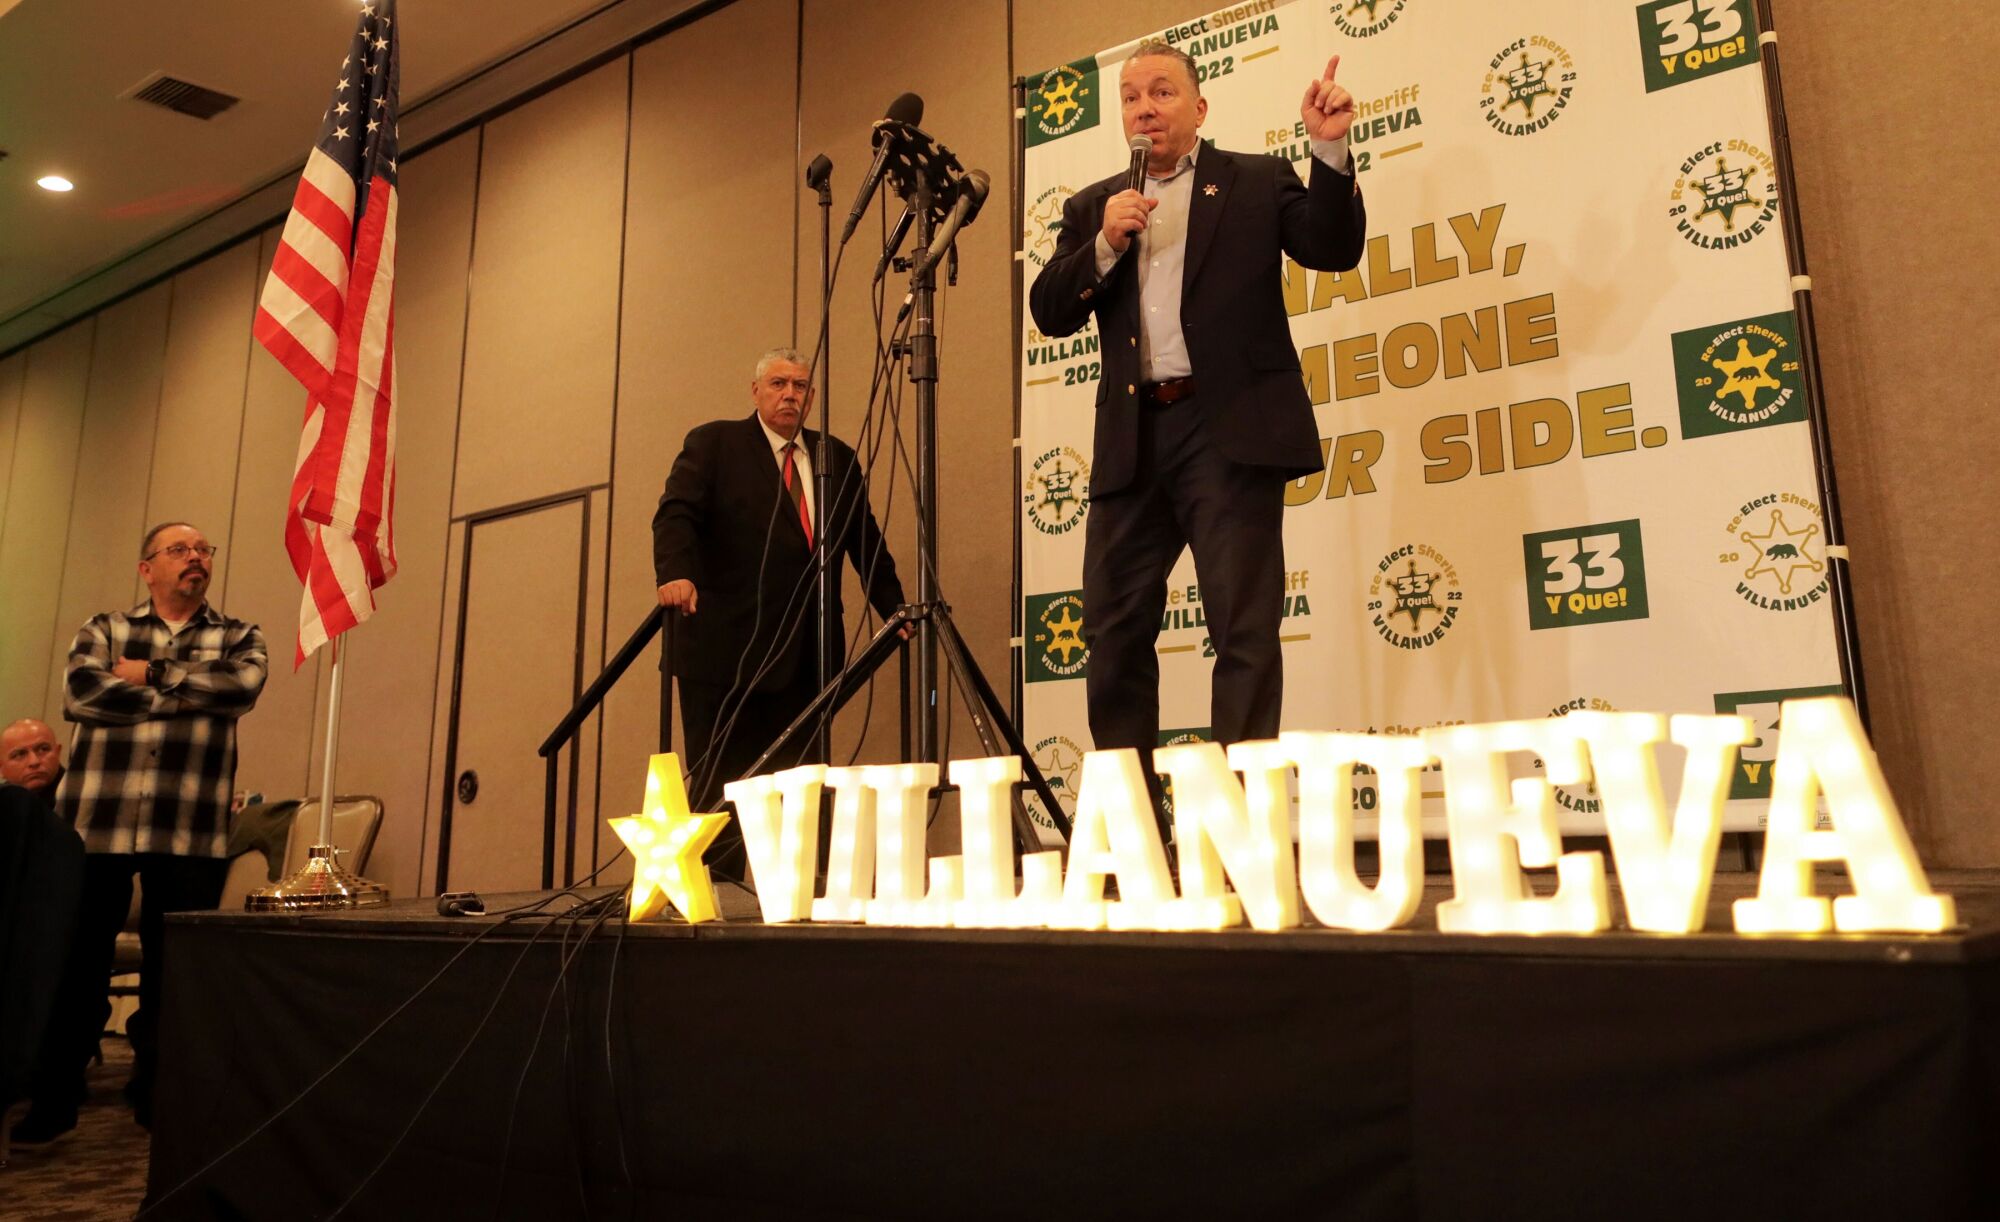 Sheriff Alex Villanueva speaks to supporters during an election night rally in Los Angeles.